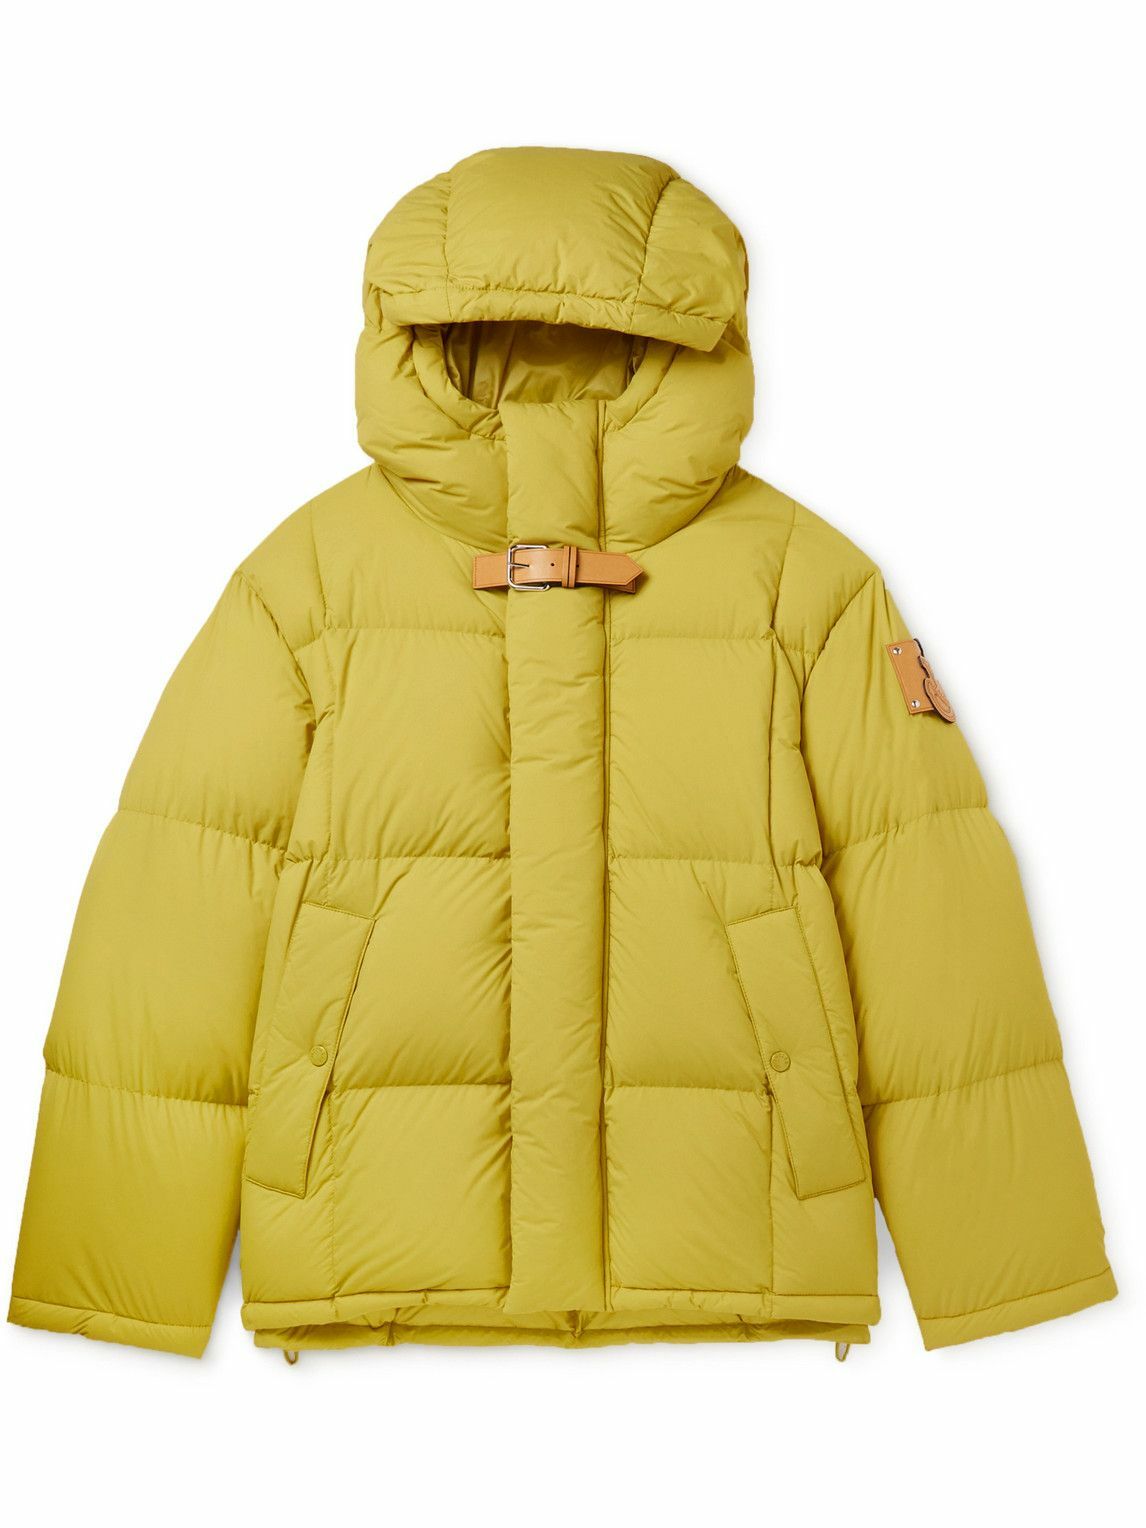 Photo: Moncler Genius - JW Anderson Wintefold Logo-Appliquéd Quilted Shell Hooded Down Jacket - Yellow